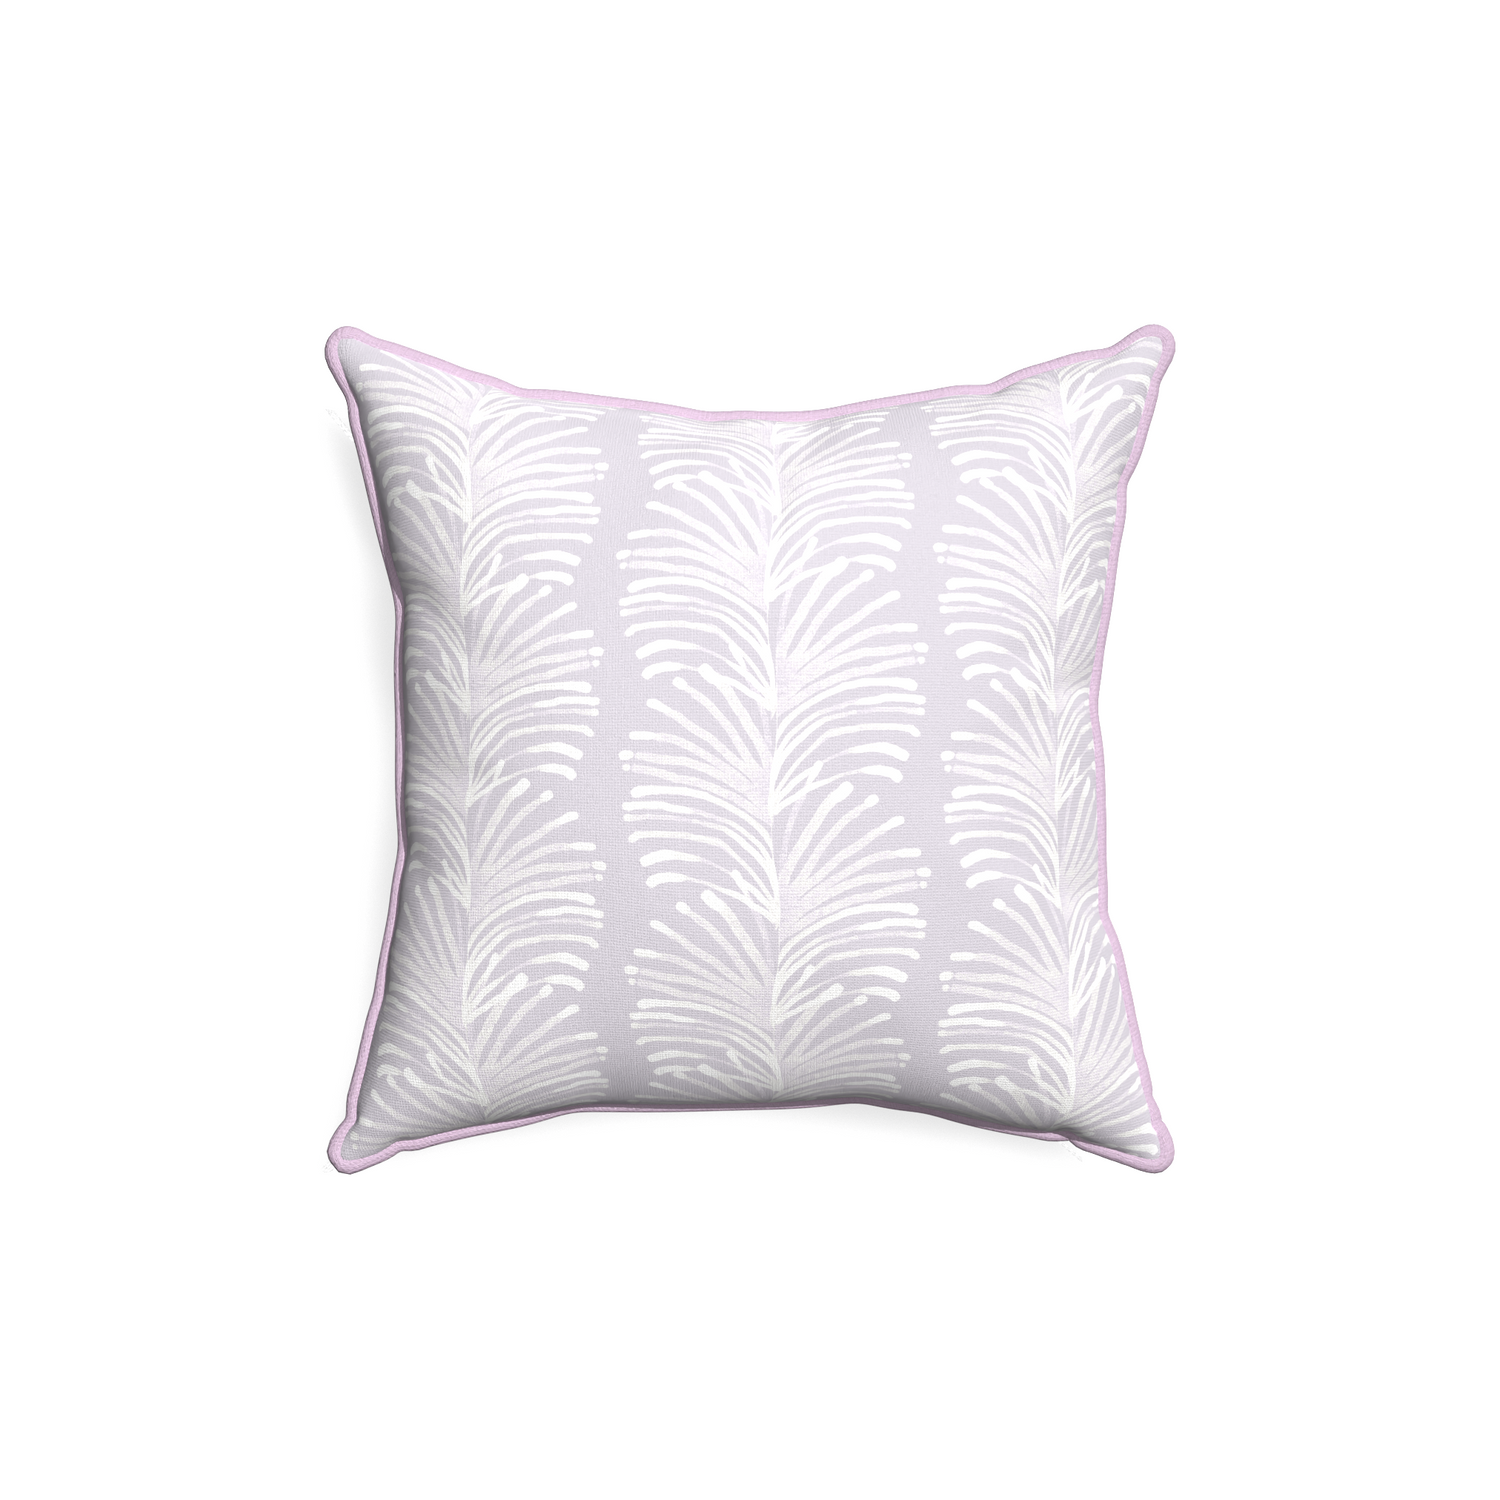 18-square emma lavender custom lavender botanical stripepillow with l piping on white background